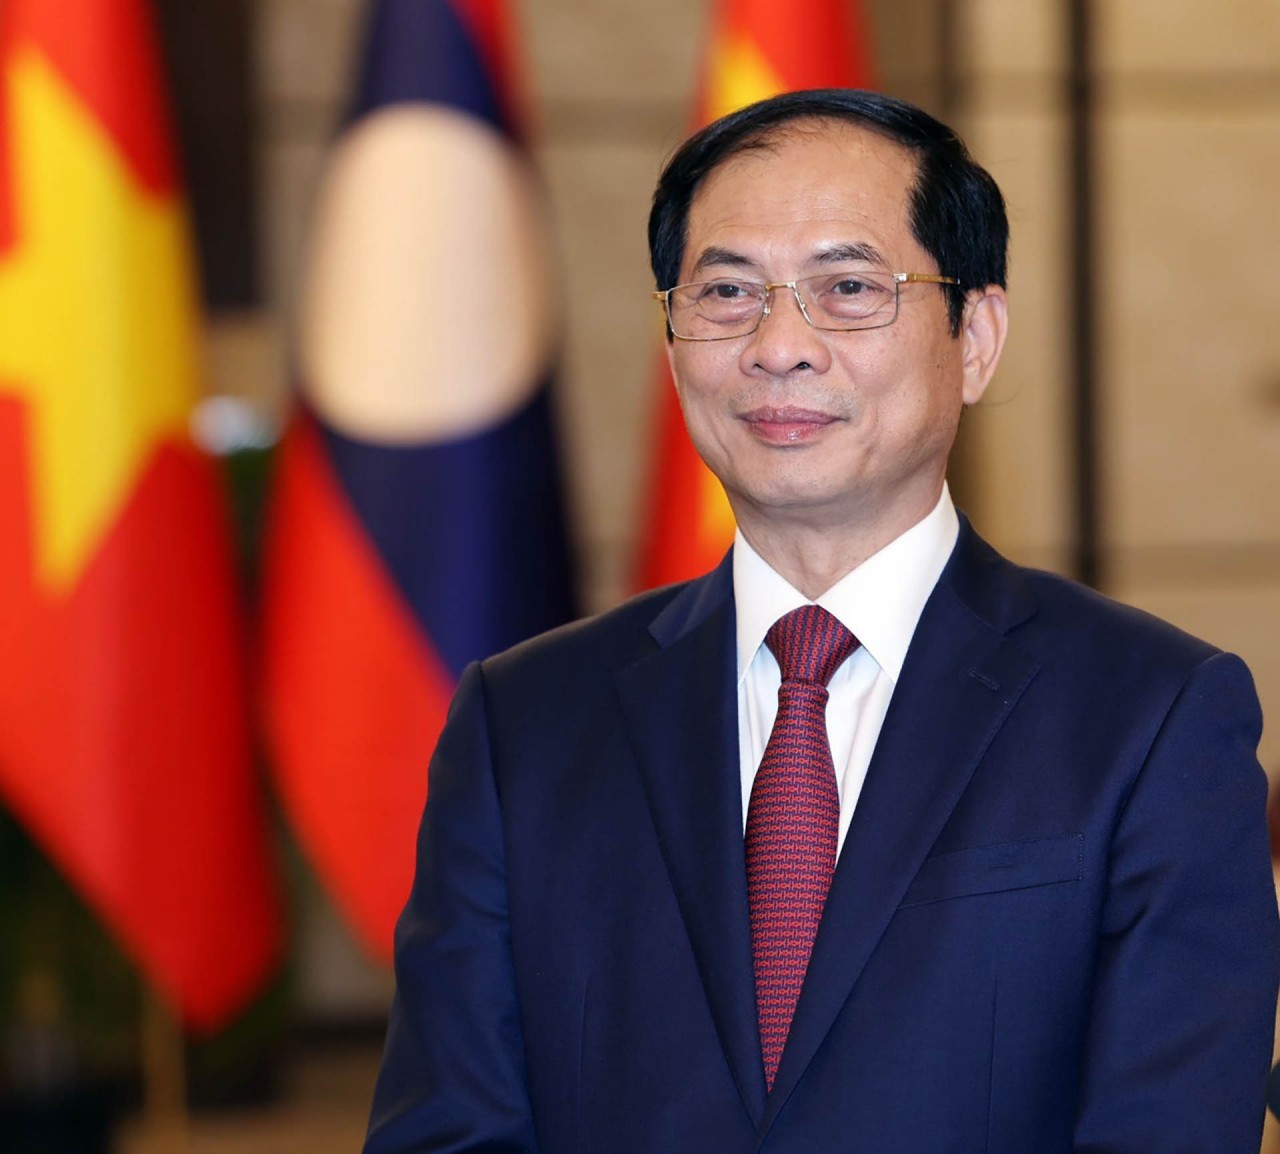 President's visit creates new impetus for Vietnam-Laos cooperation: Foreign Minister